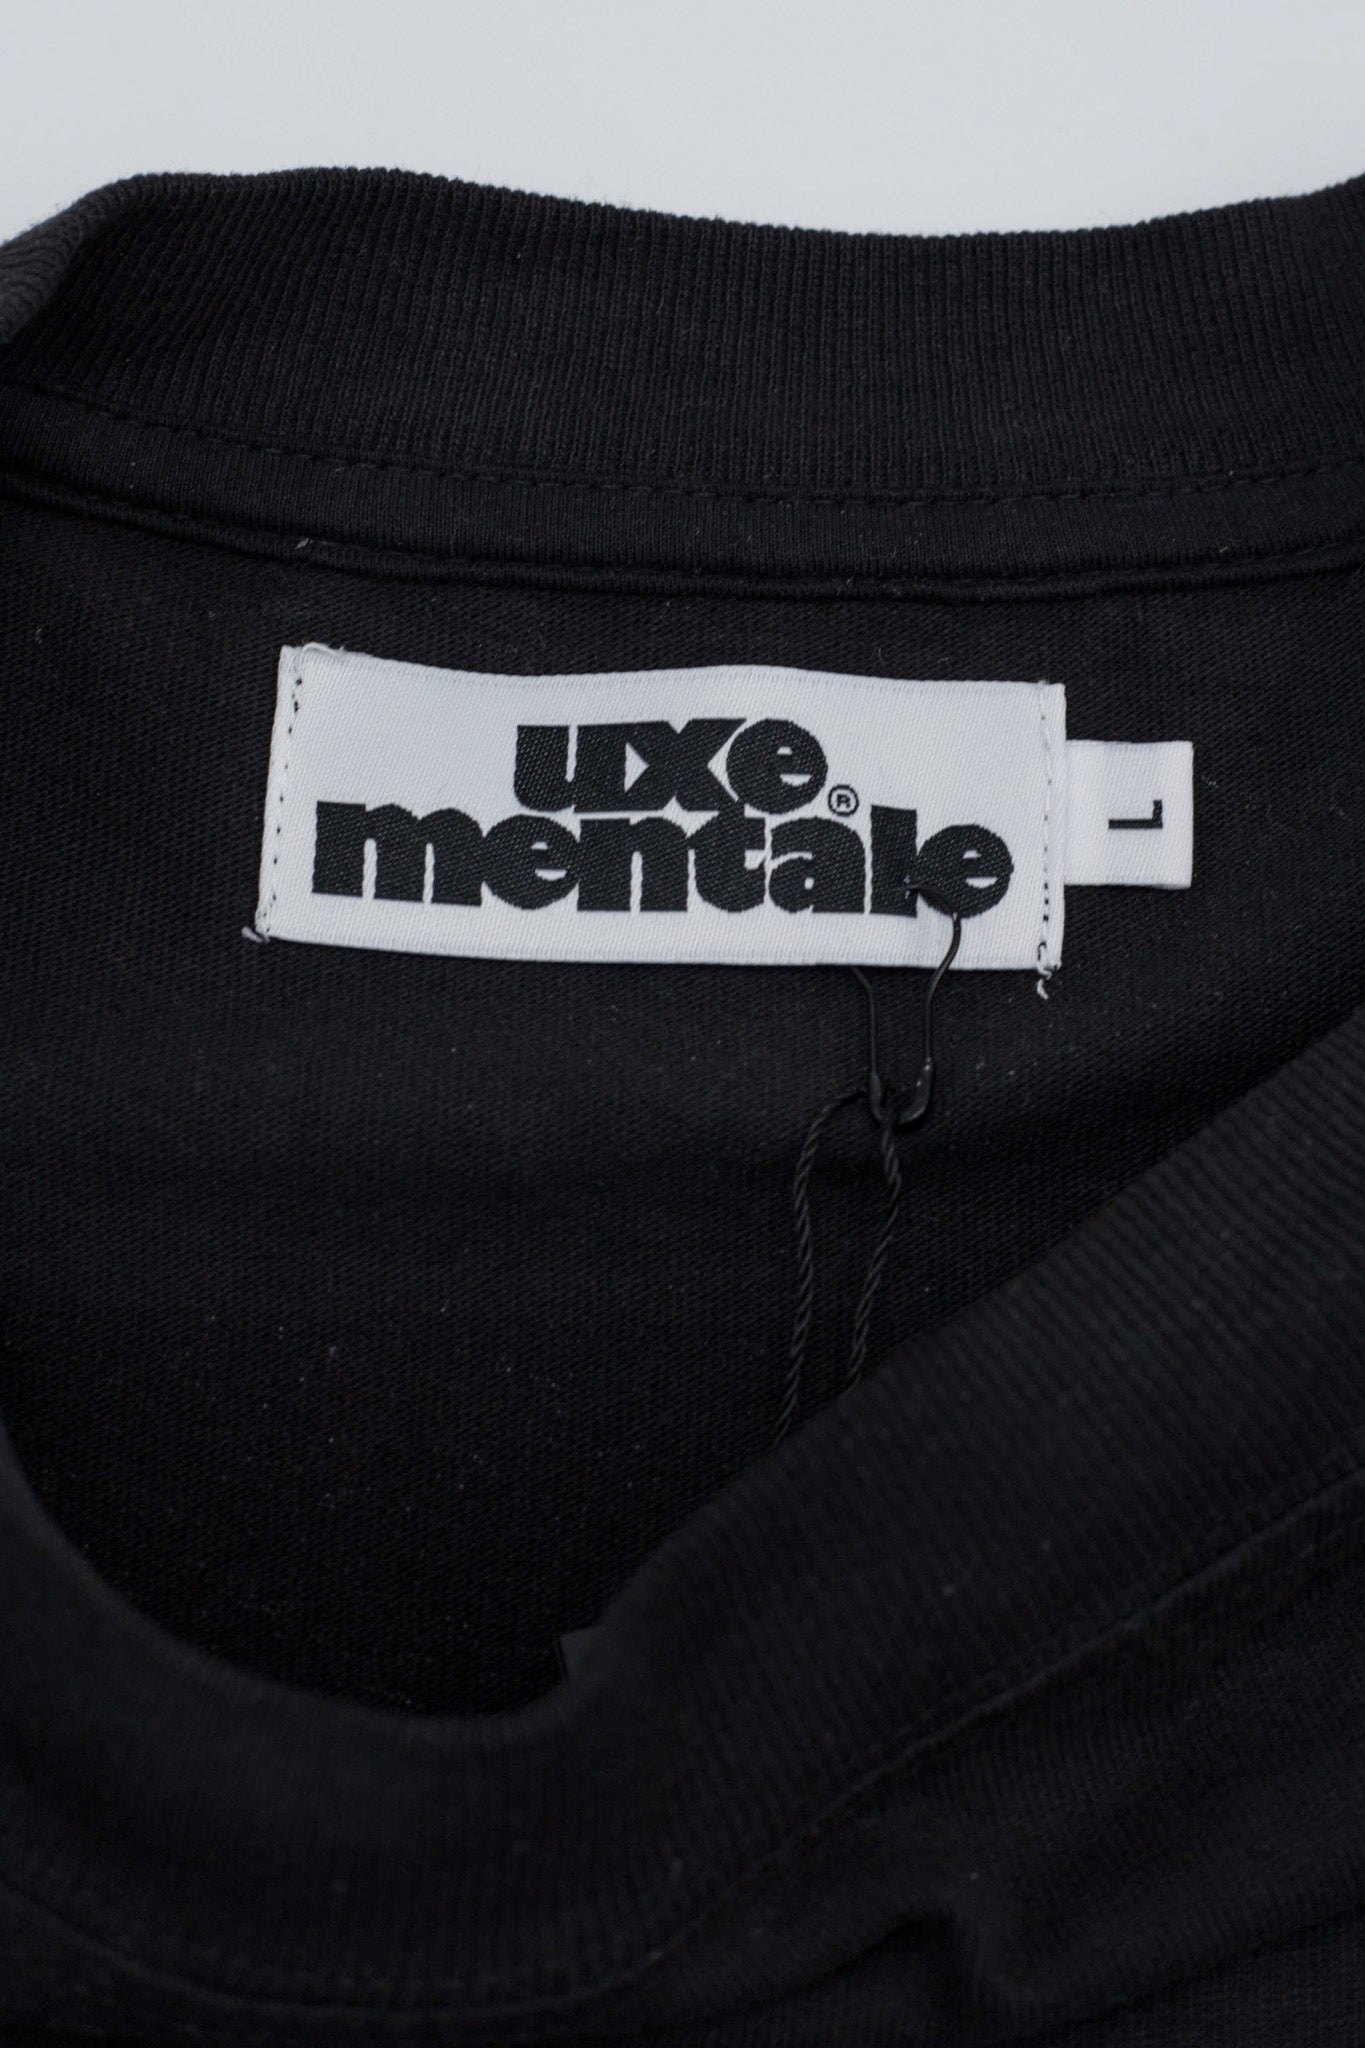 Uxe Mentale x Blue in Green Collaboration L/S Tee